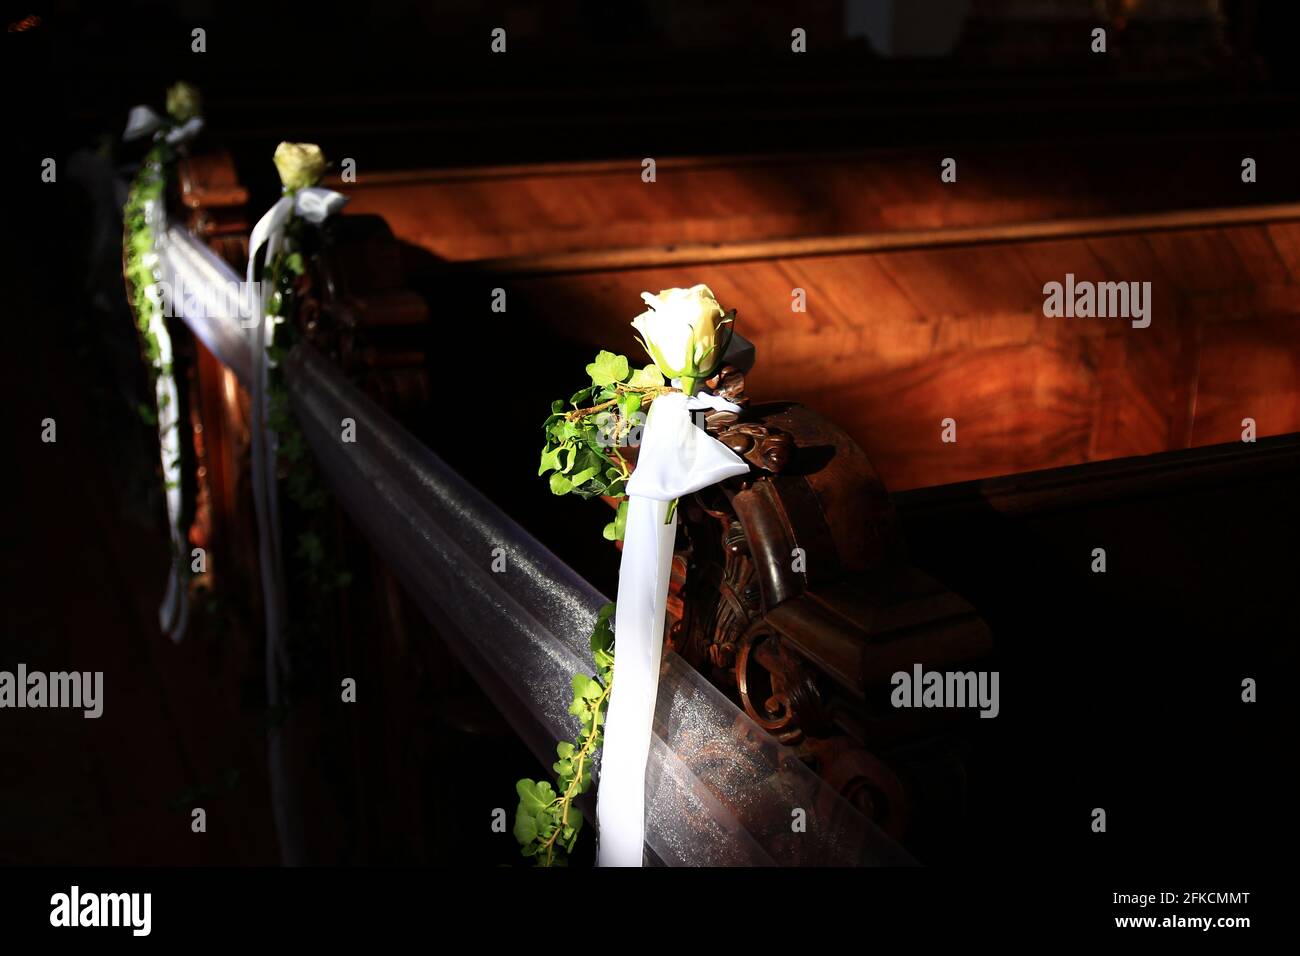 Soft light shines on wooden church pews decorated with tulle, ivy, bows and roses for a wedding. Stock Photo